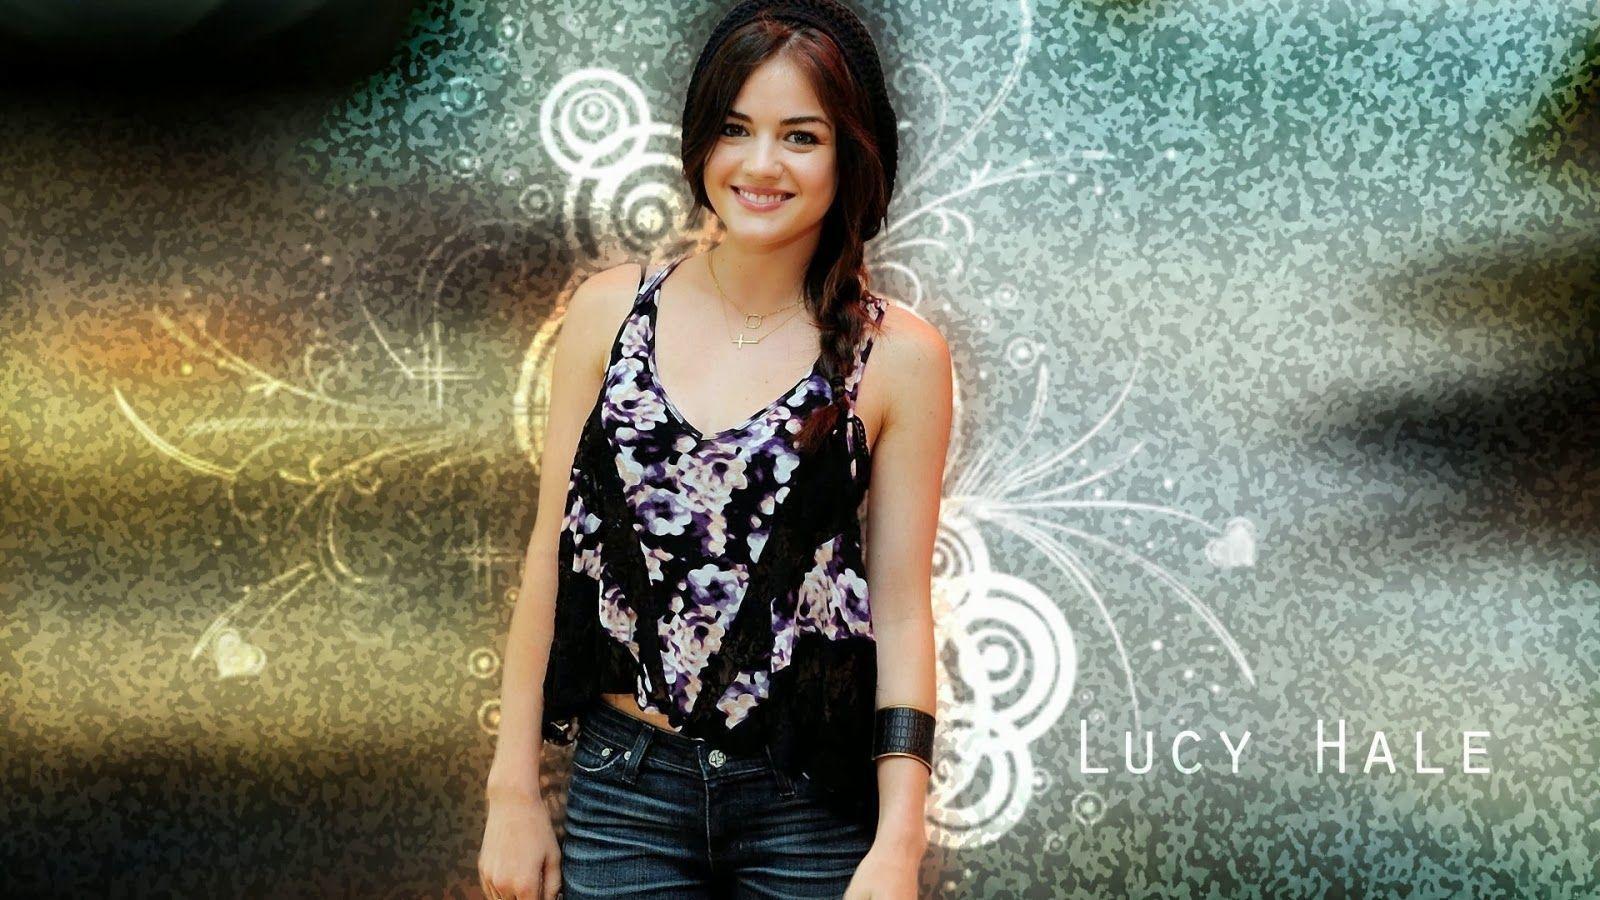 Hollywood Actress Lucy Hale Wallpaper And News